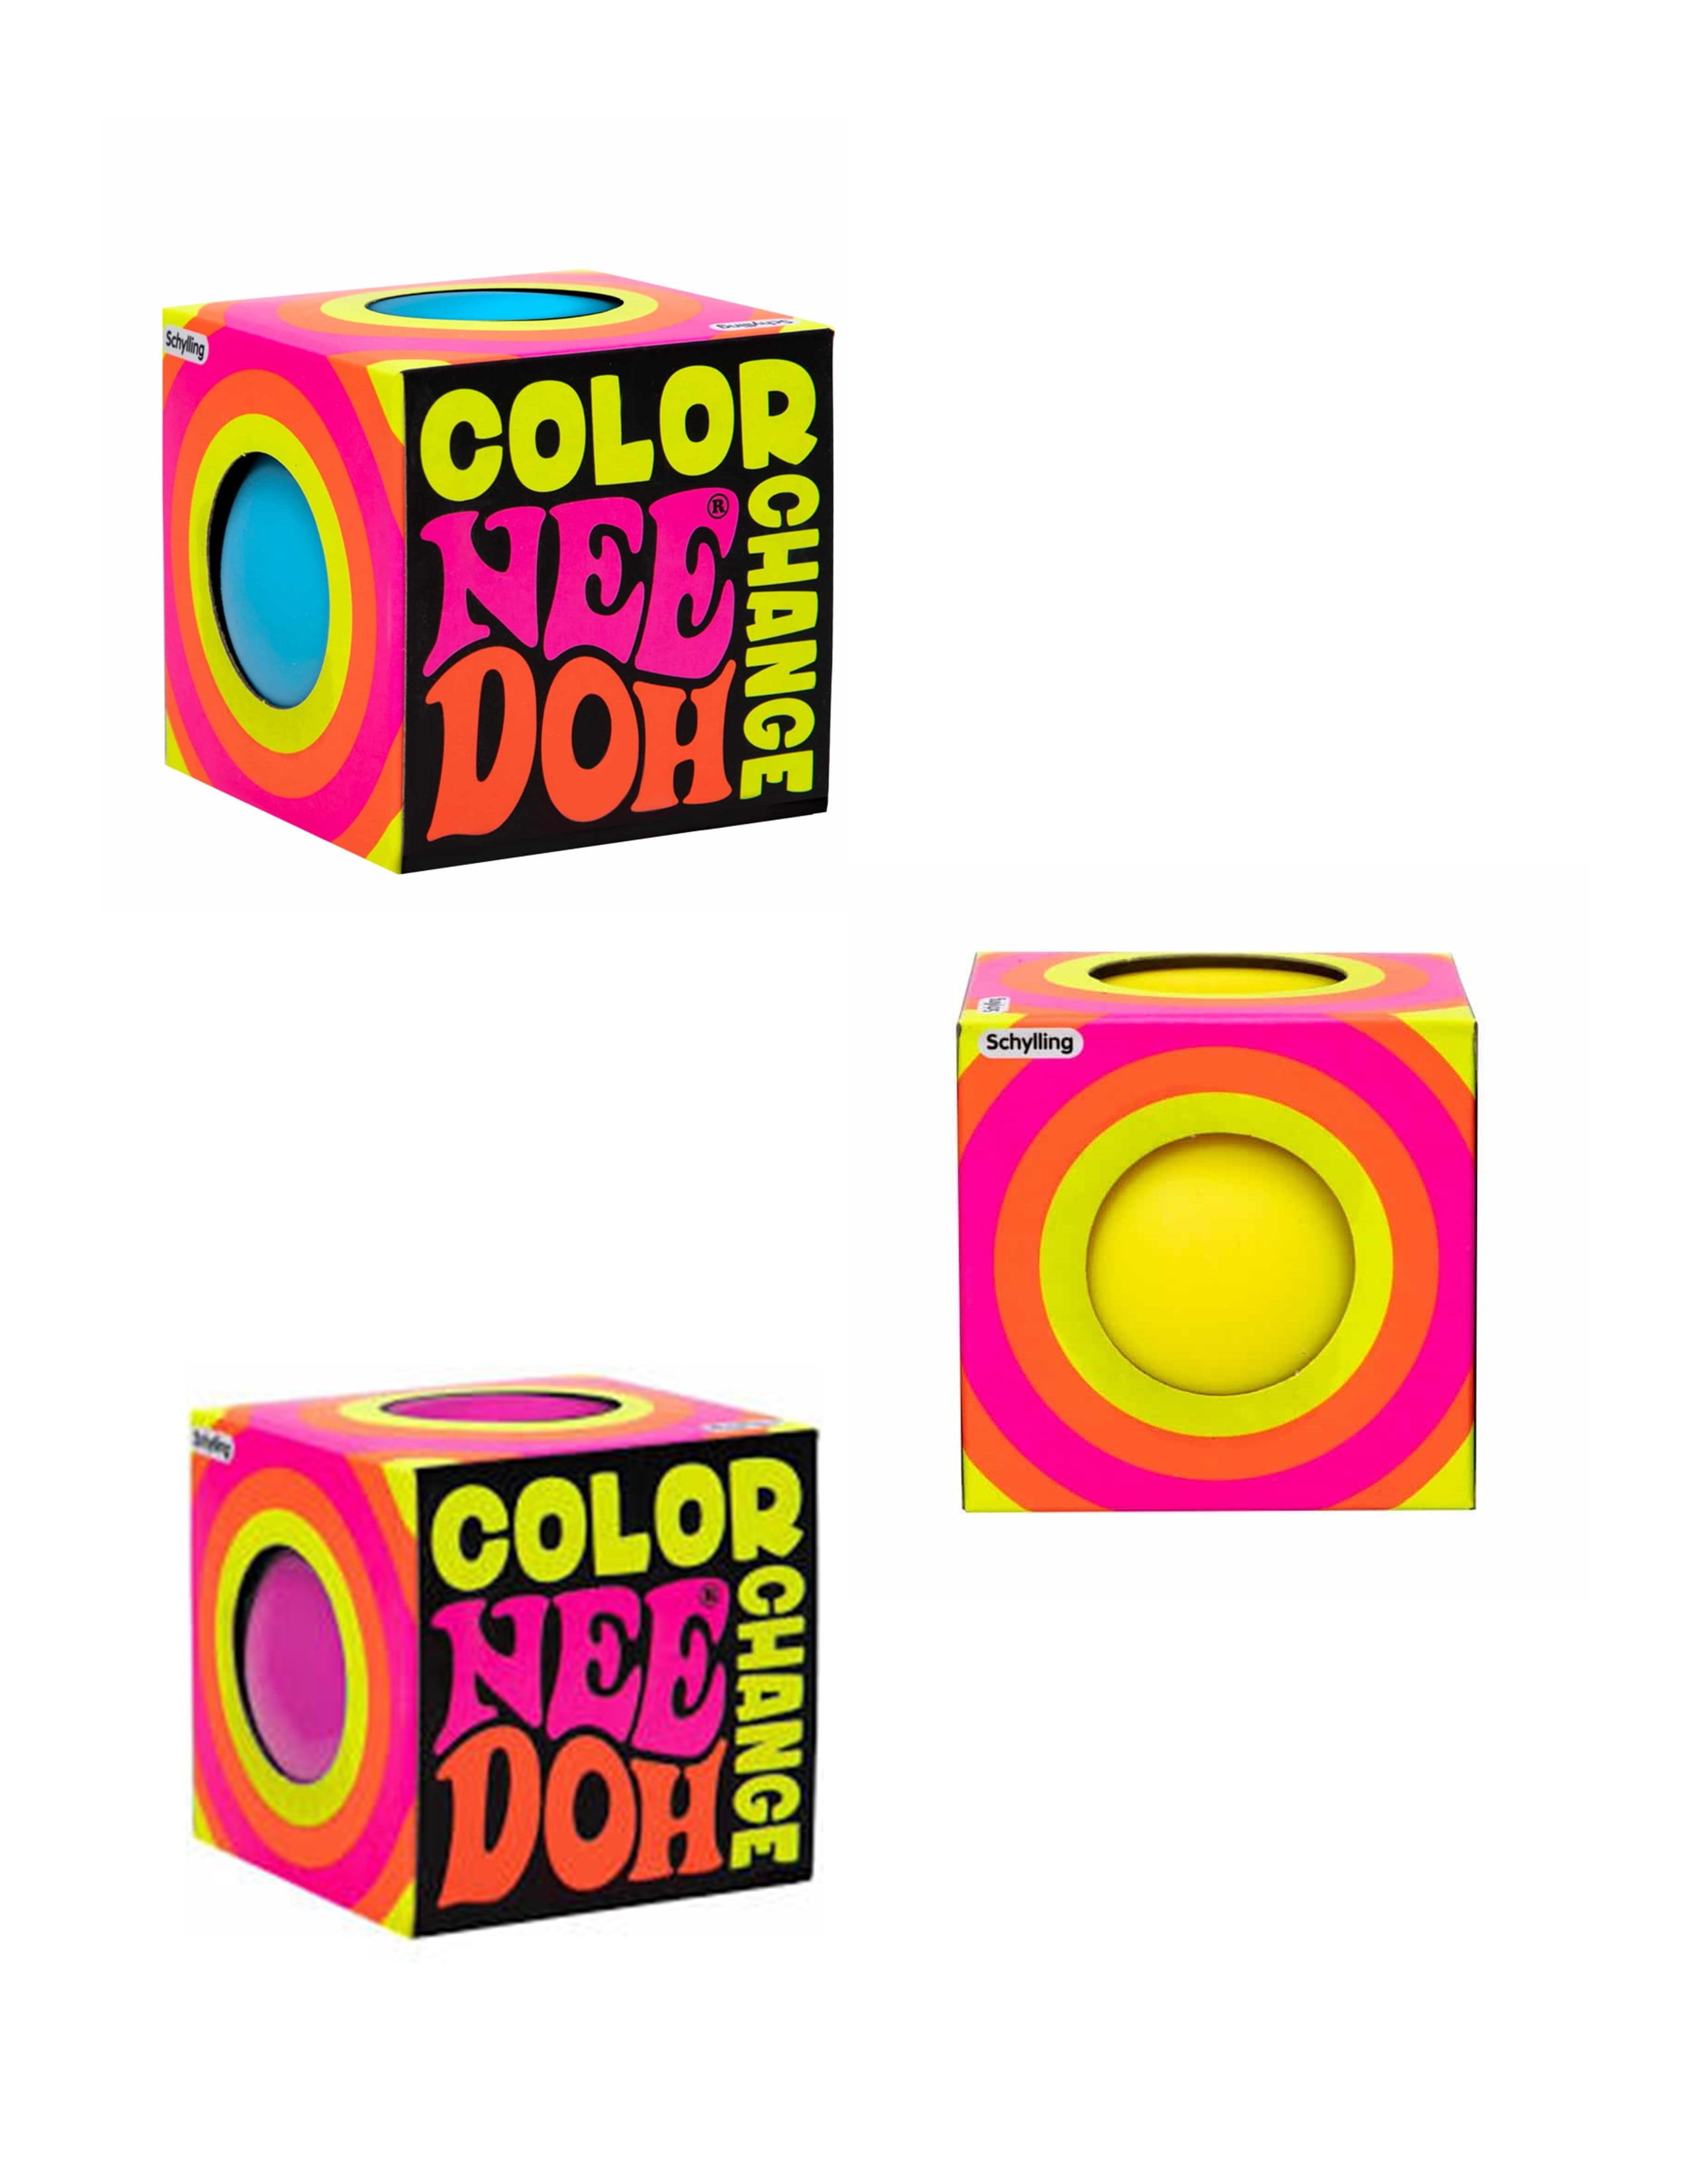 Nee-Doh Schylling Color Change Groovy Glob! 